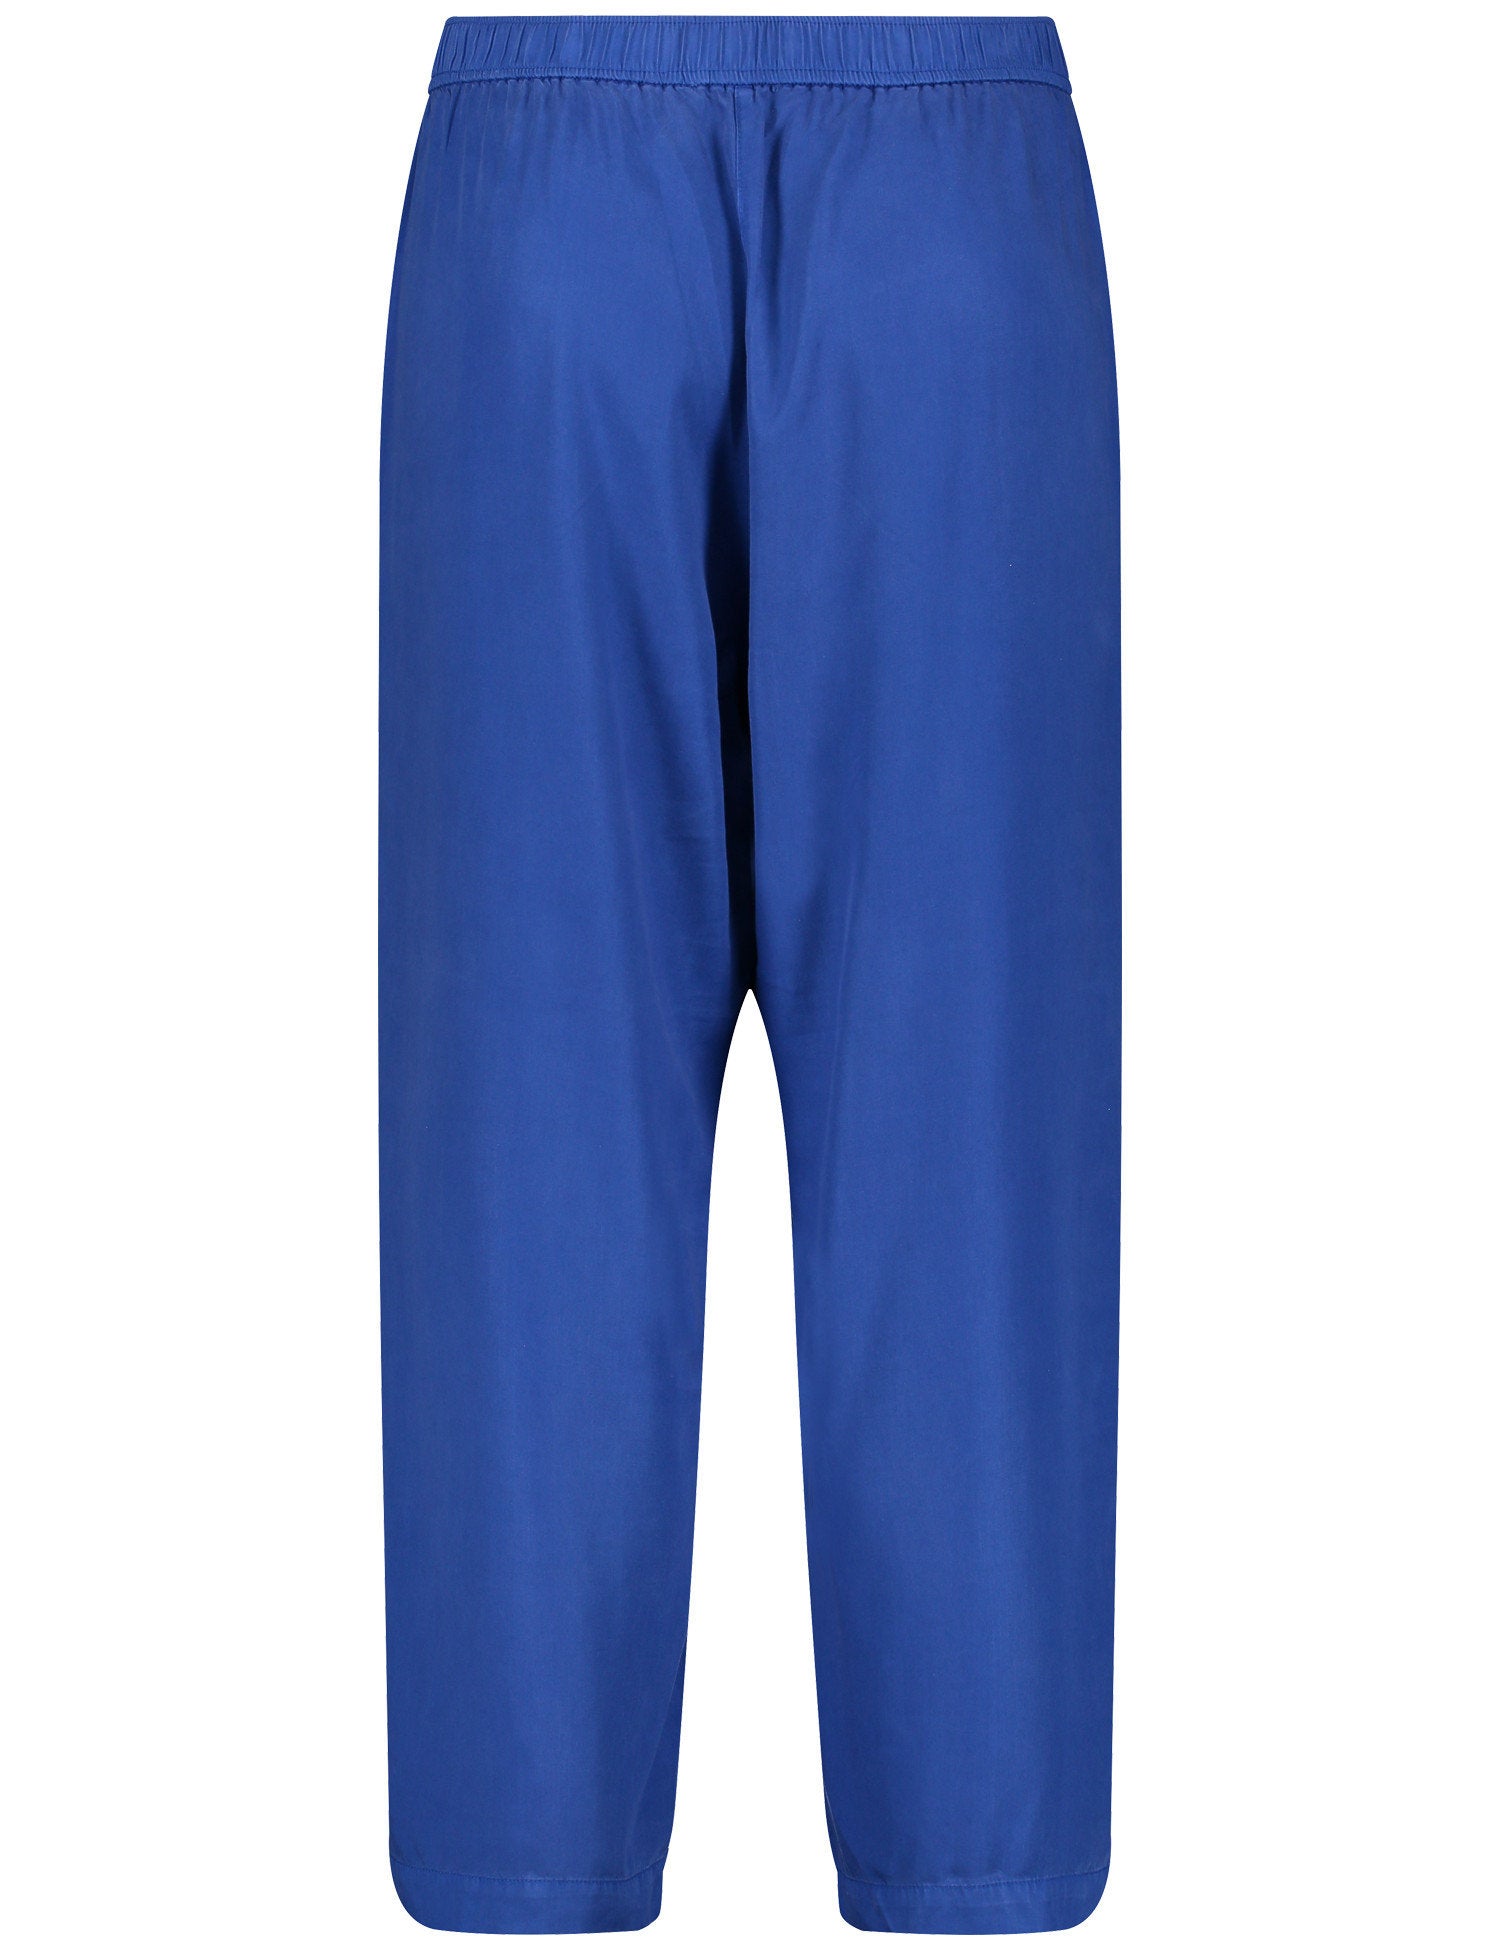 Wide Summer Trousers Made Of Lyocell_420036-21068_8860_02